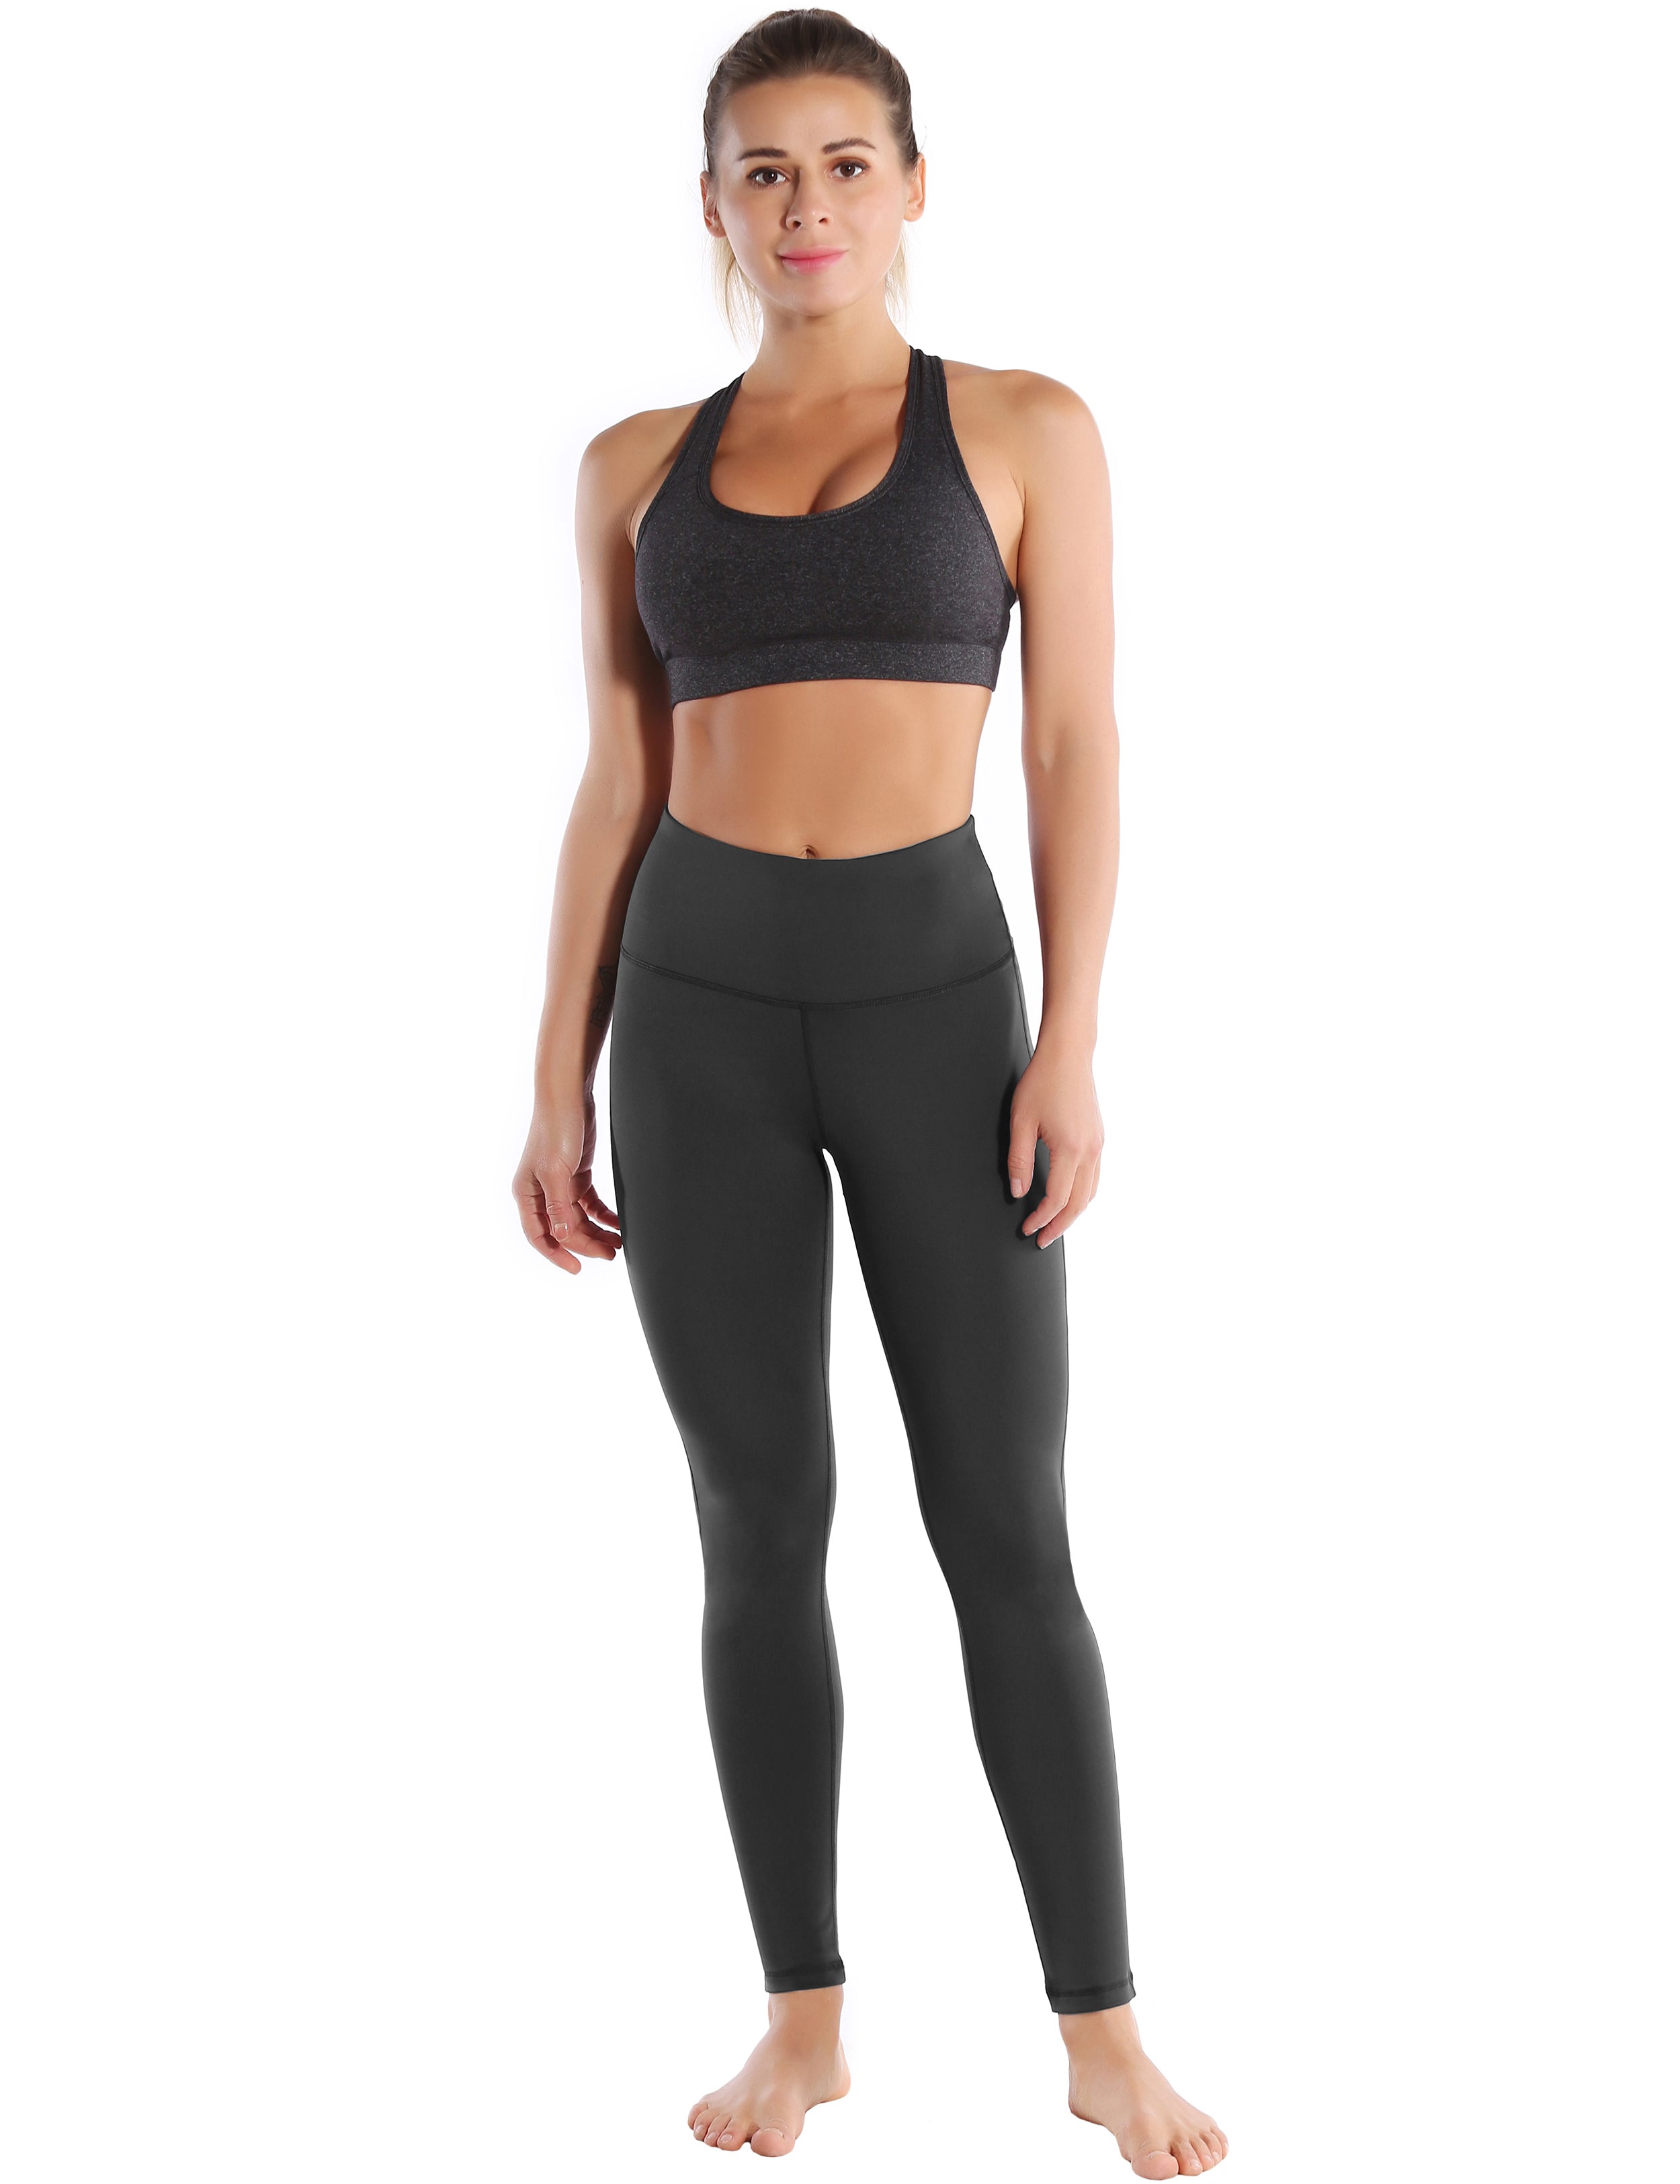 High Waist Side Line Yoga Pants shadowcharcoal Side Line is Make Your Legs Look Longer and Thinner 75%Nylon/25%Spandex Fabric doesn't attract lint easily 4-way stretch No see-through Moisture-wicking Tummy control Inner pocket Two lengths